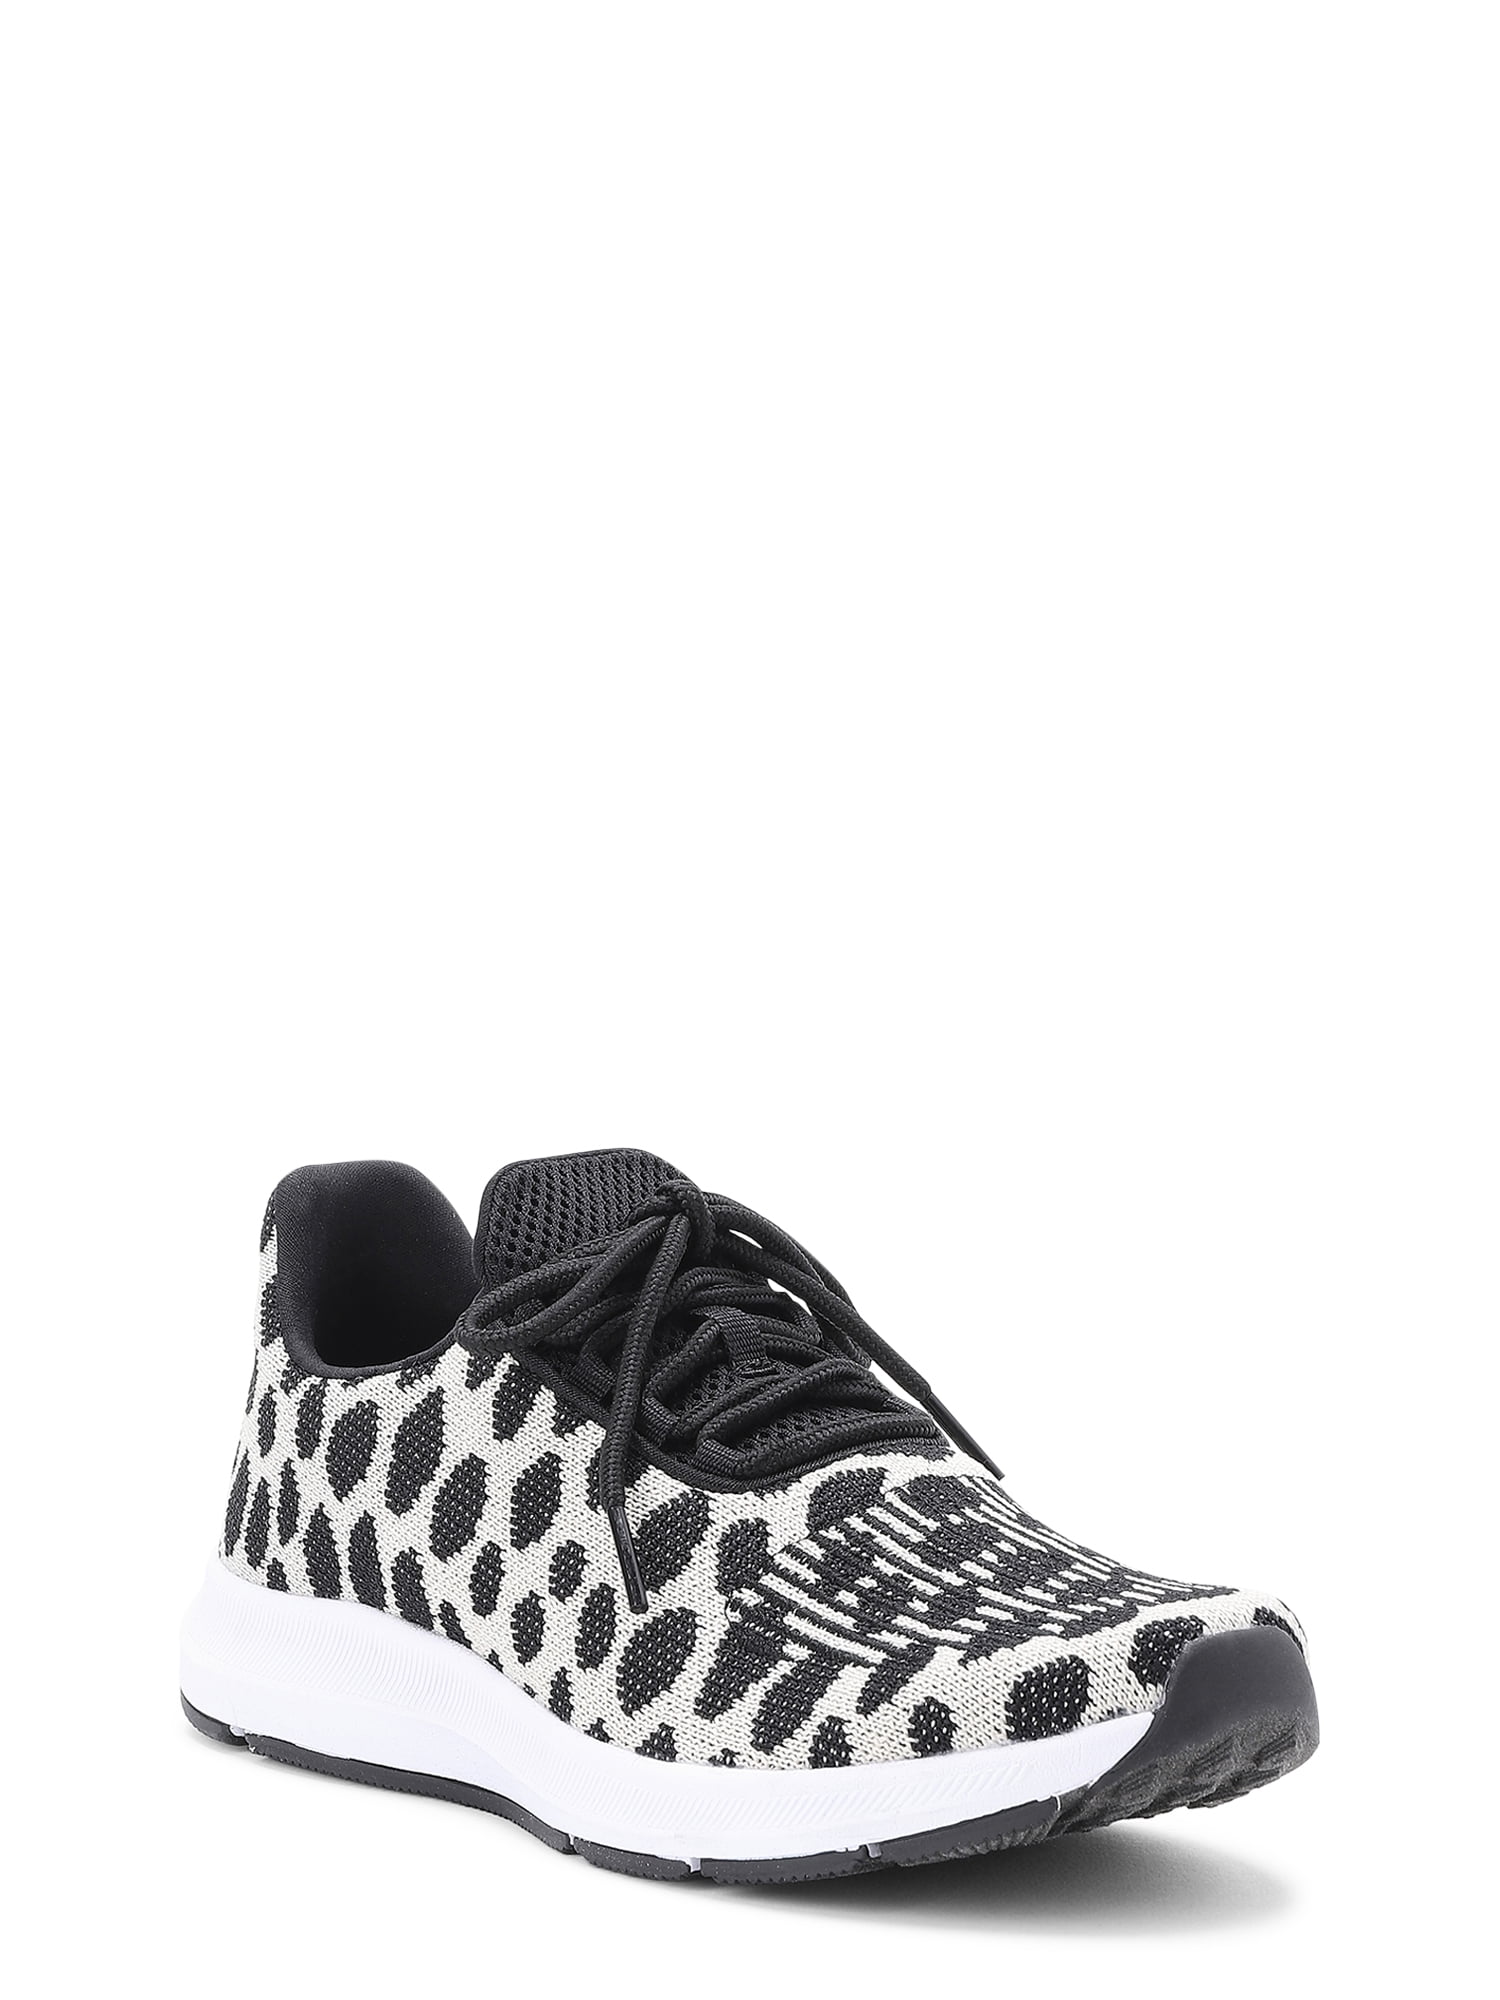 womens black and white athletic shoes